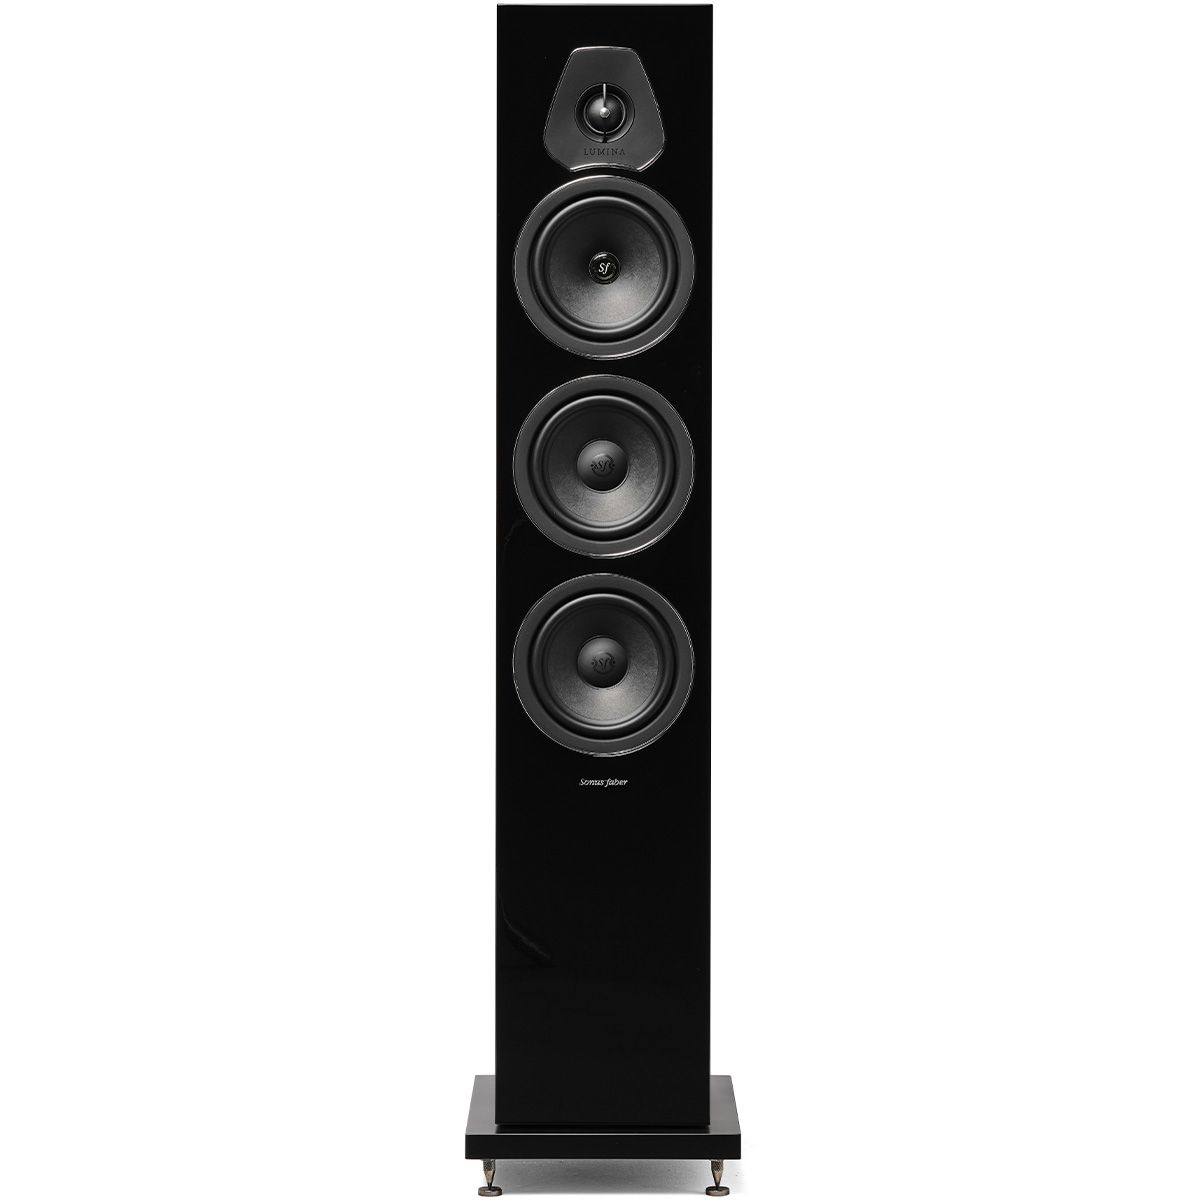 Sonus Faber Lumina III Floorstanding Speaker - Black - Each - front view without grille